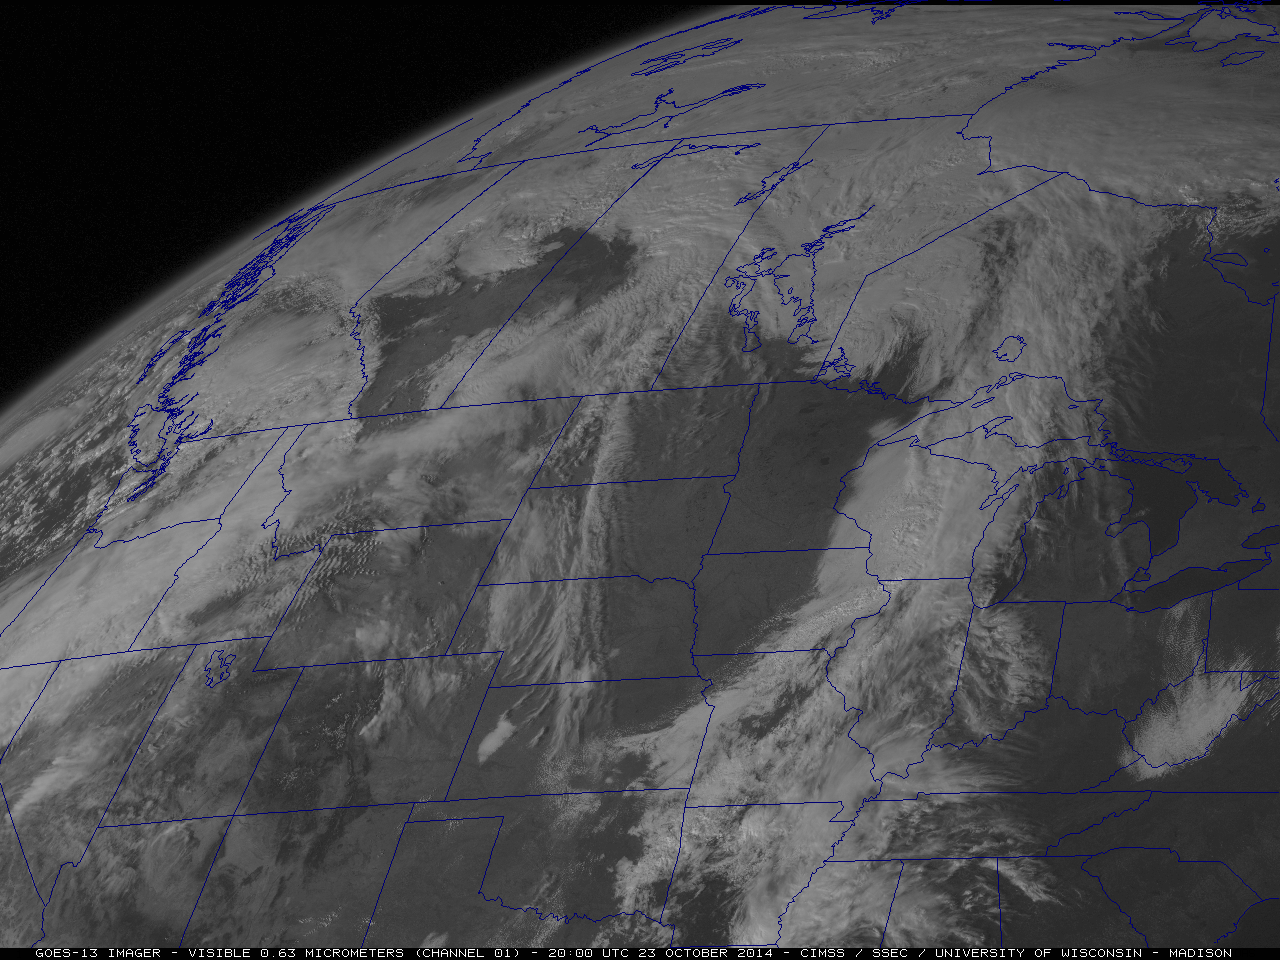 GOES-13 0.63 µm visible channel images